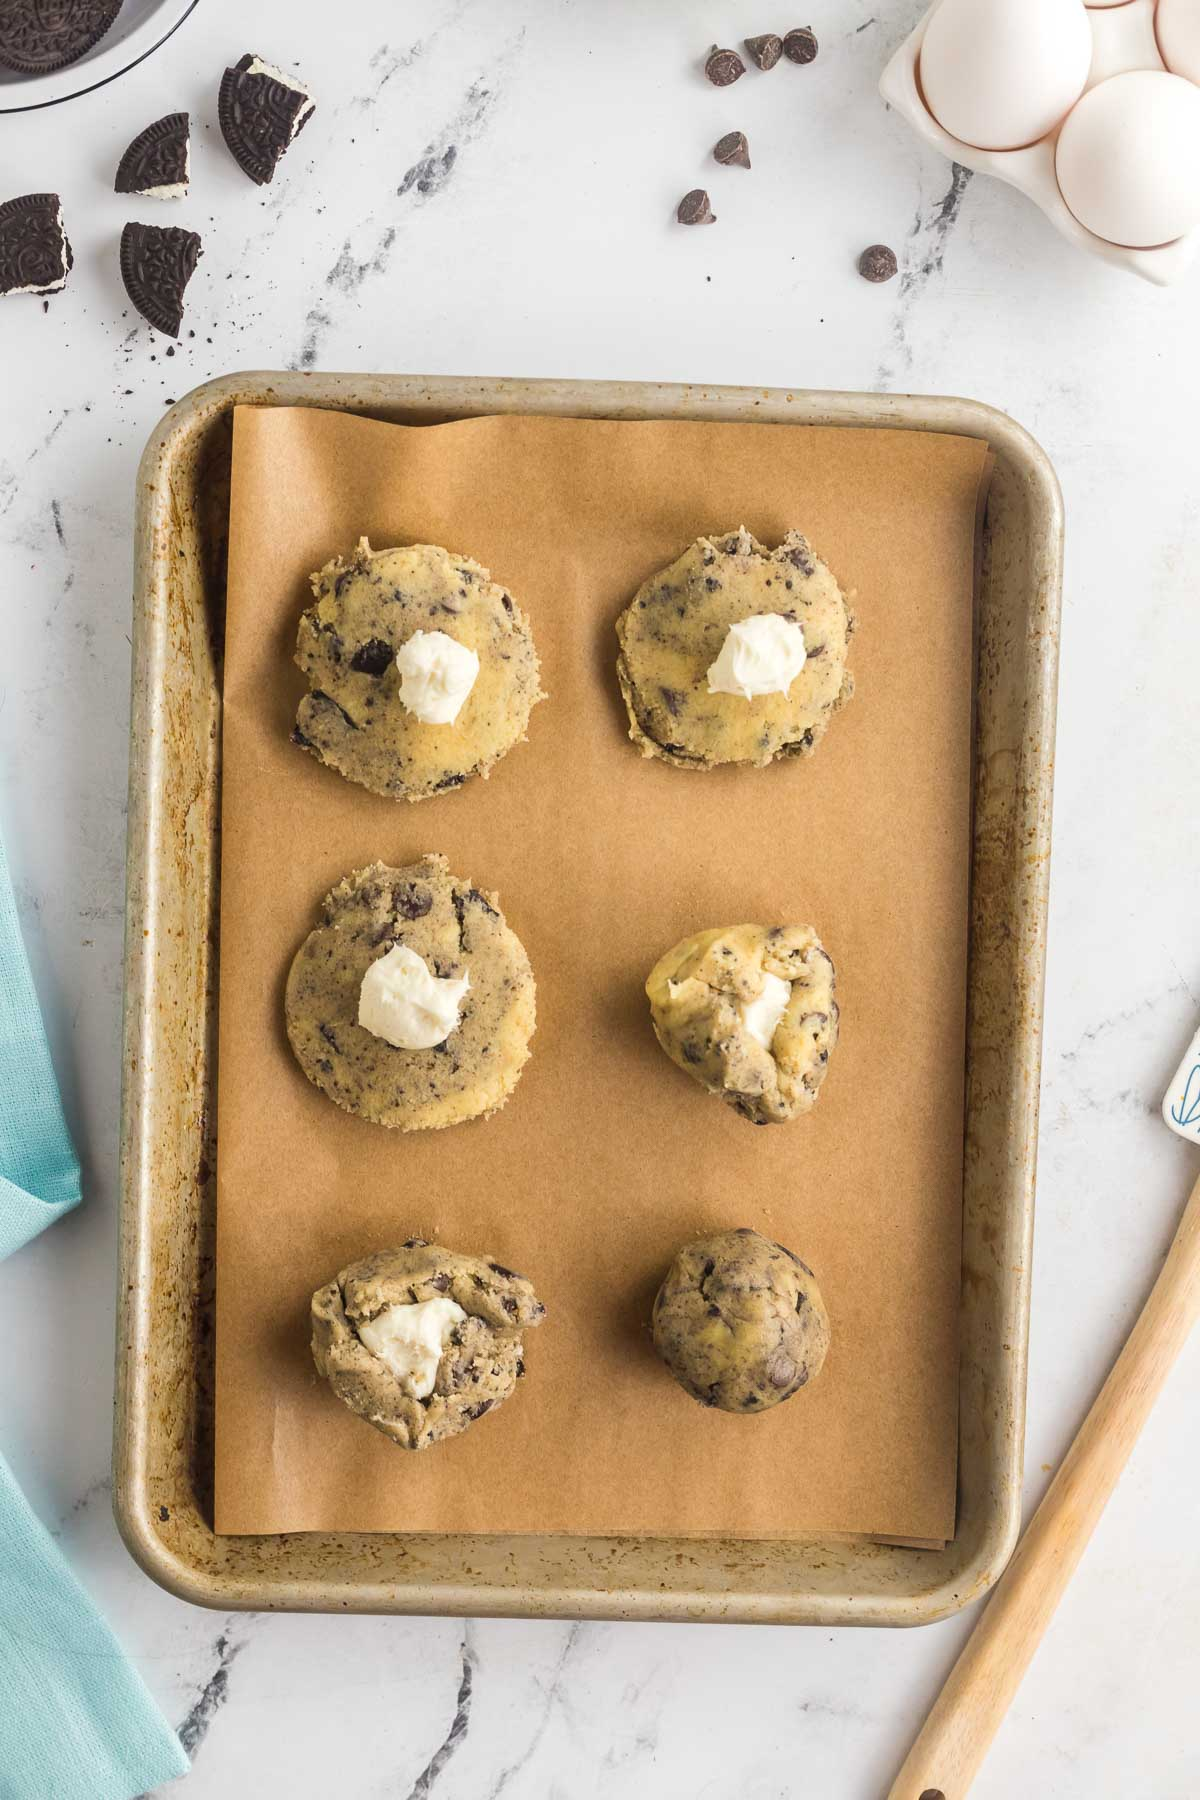 cream cheese filling in center of cookie dough ball and folded up around it